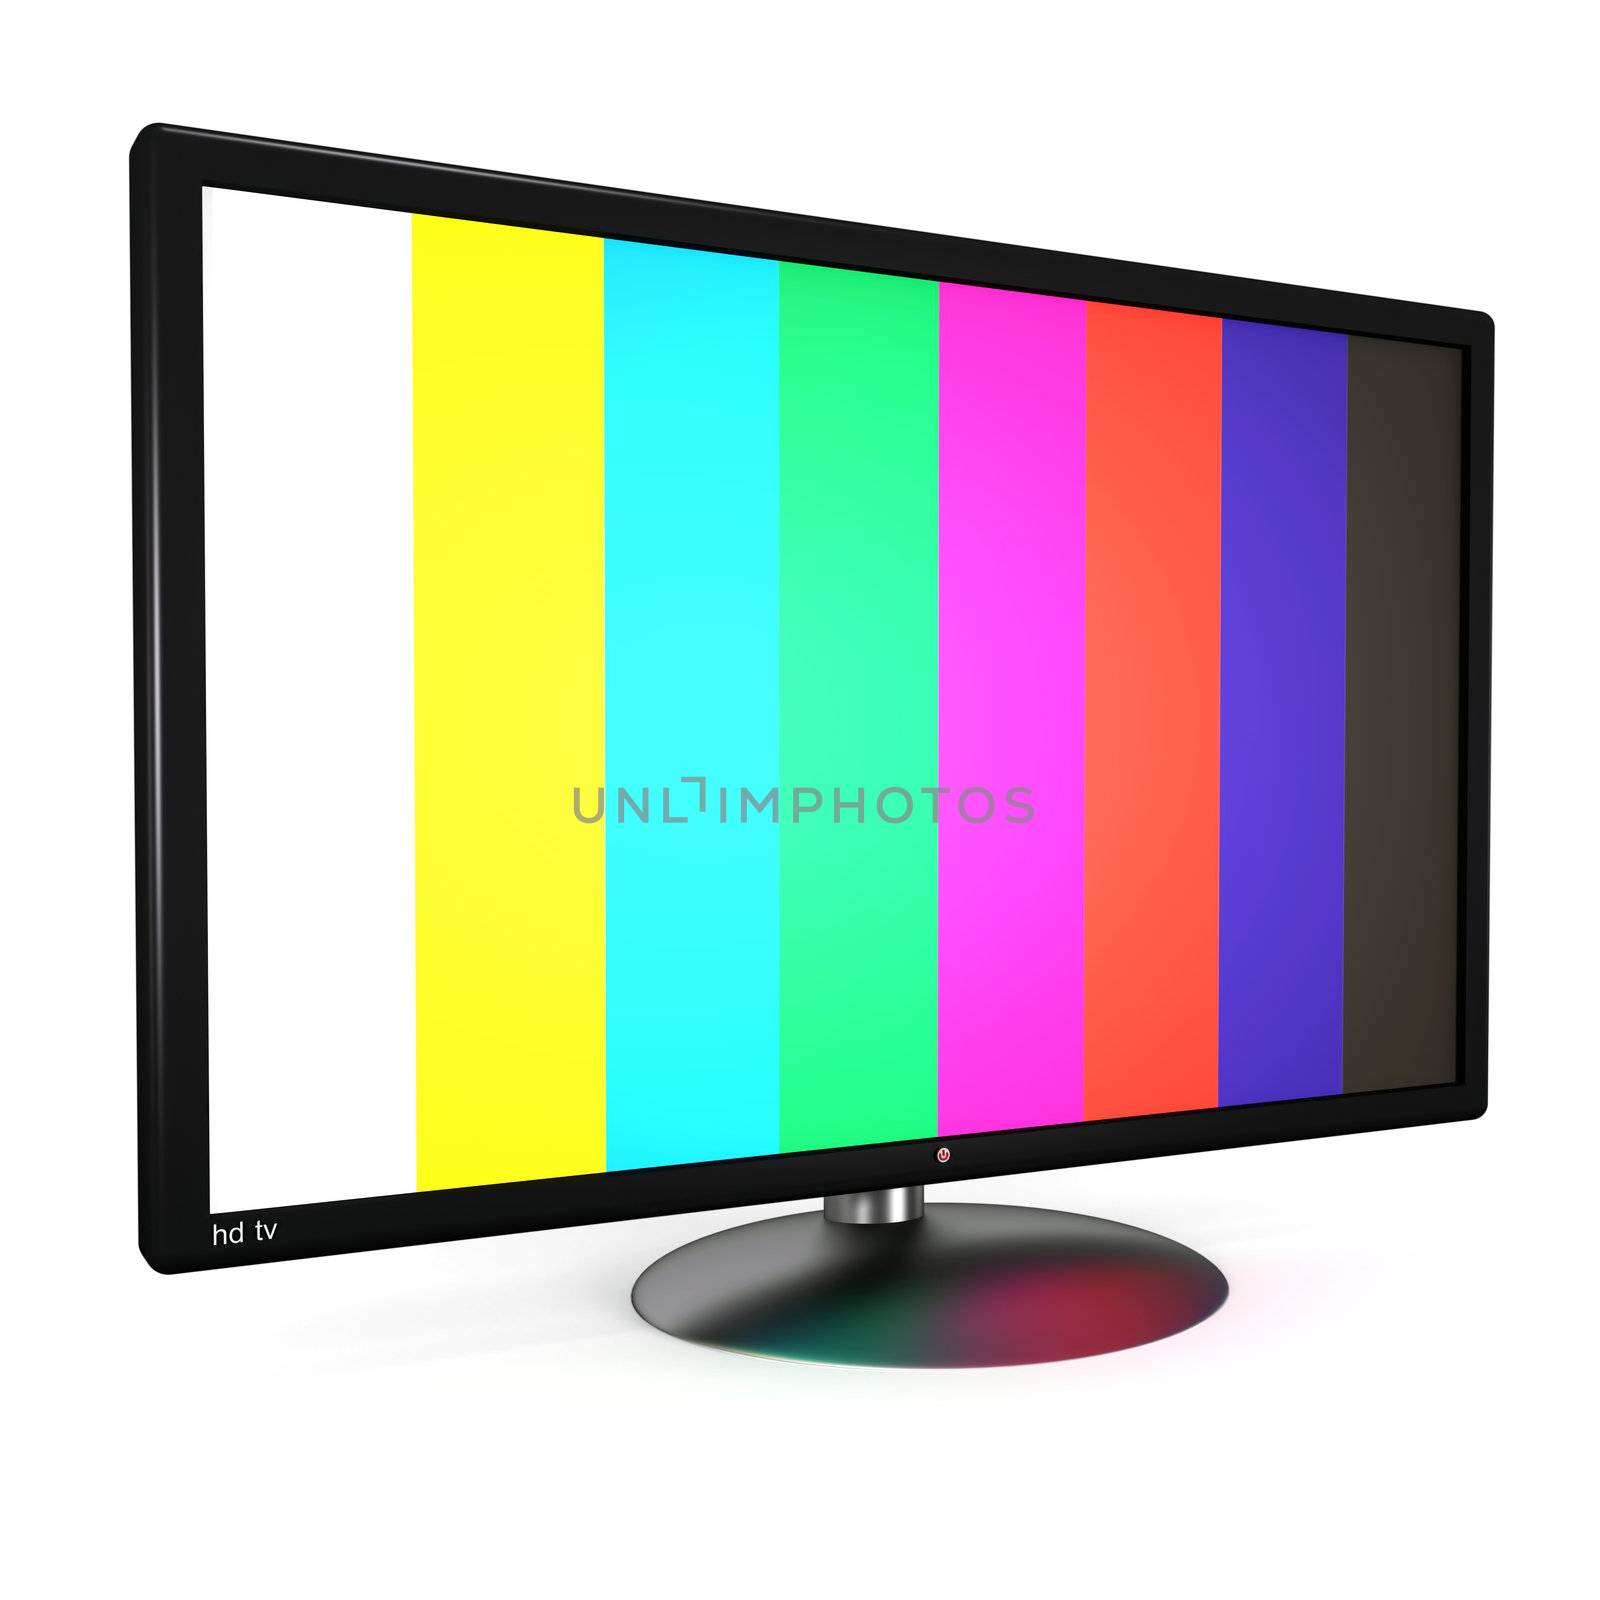 LCD TV by magraphics